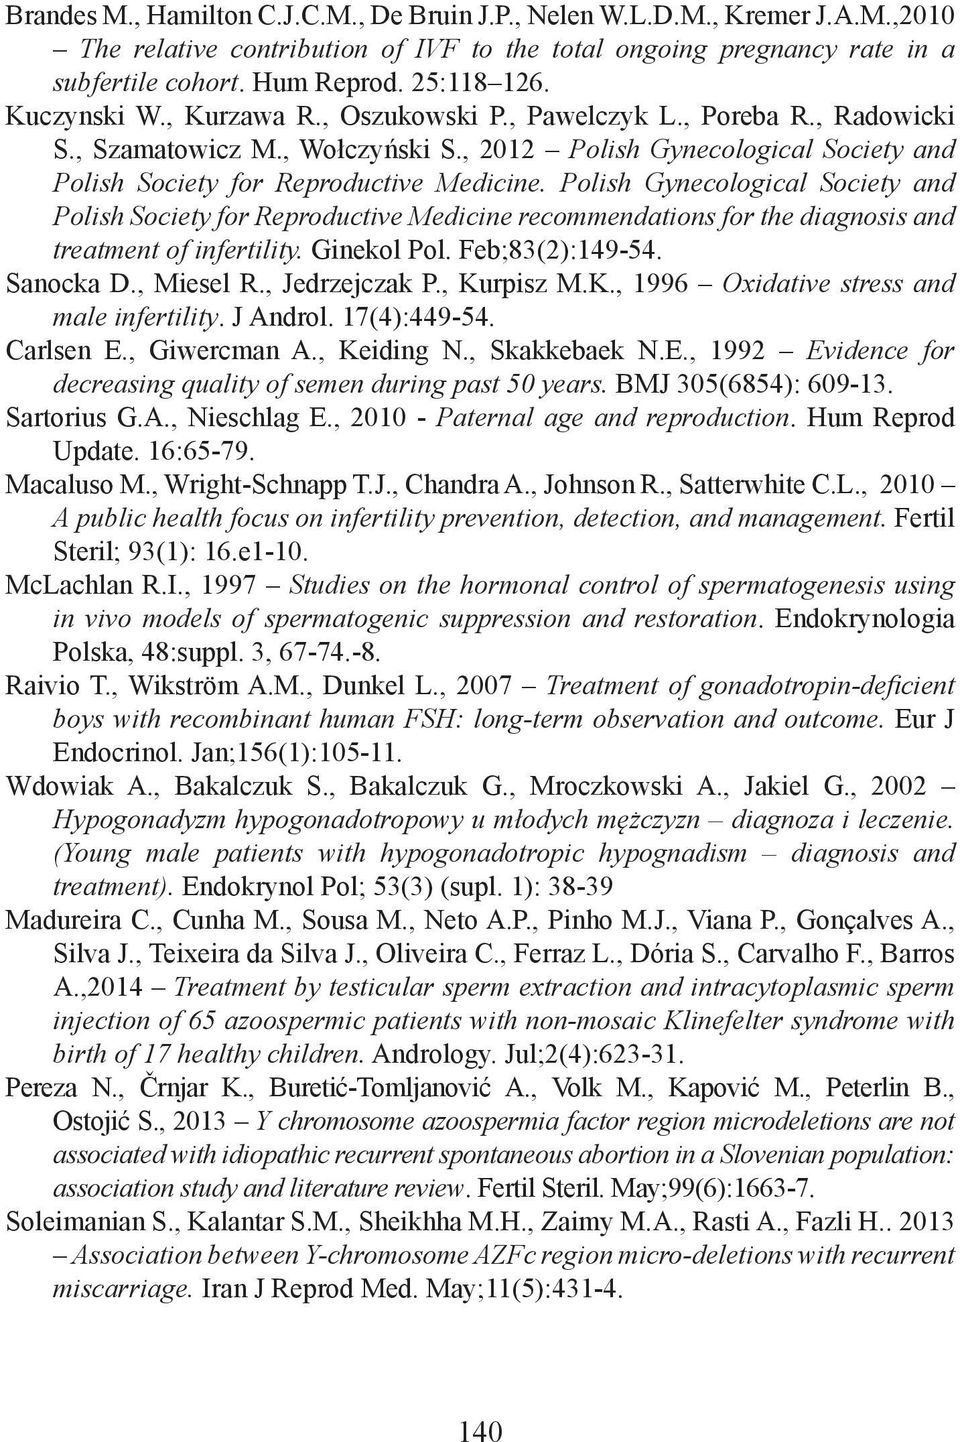 Polish Gynecological Society and Polish Society for Reproductive Medicine recommendations for the diagnosis and treatment of infertility. Ginekol Pol. Feb;83(2):149-54. Sanocka D., Miesel R.